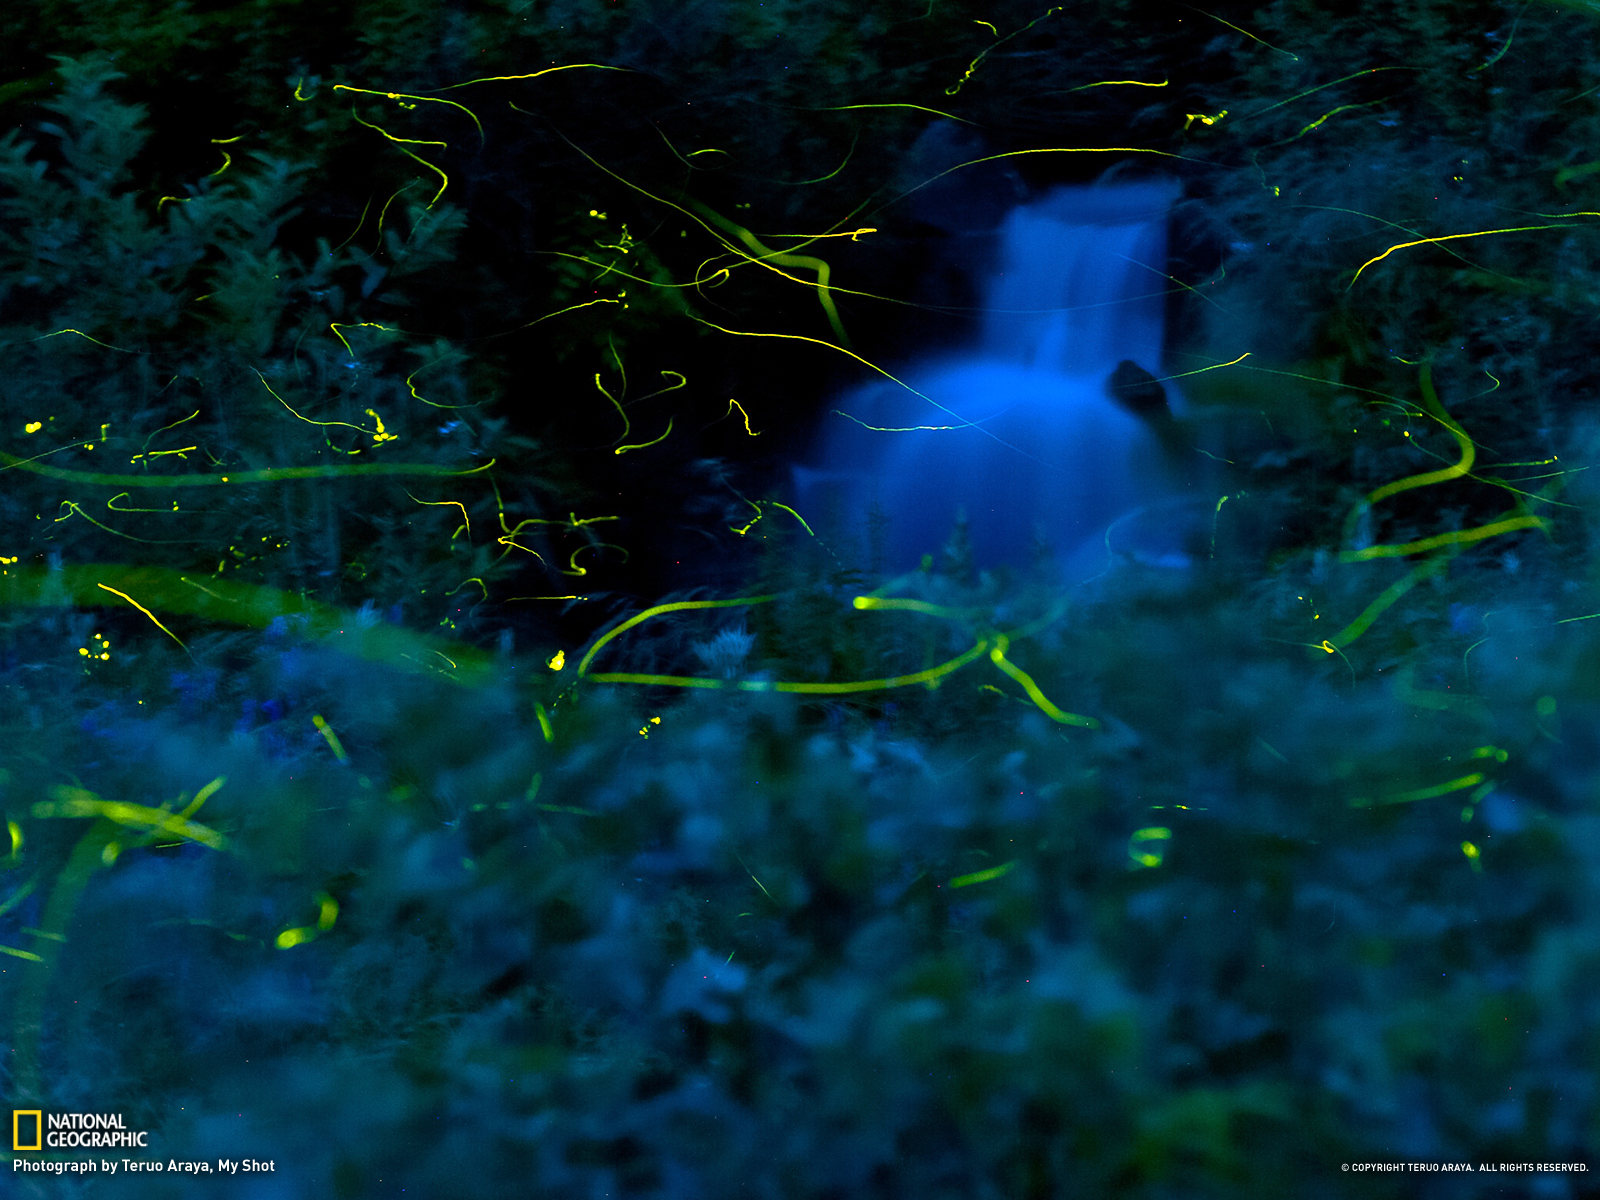 Firefly Picture Nature Wallpaper National Geographic Photo Of